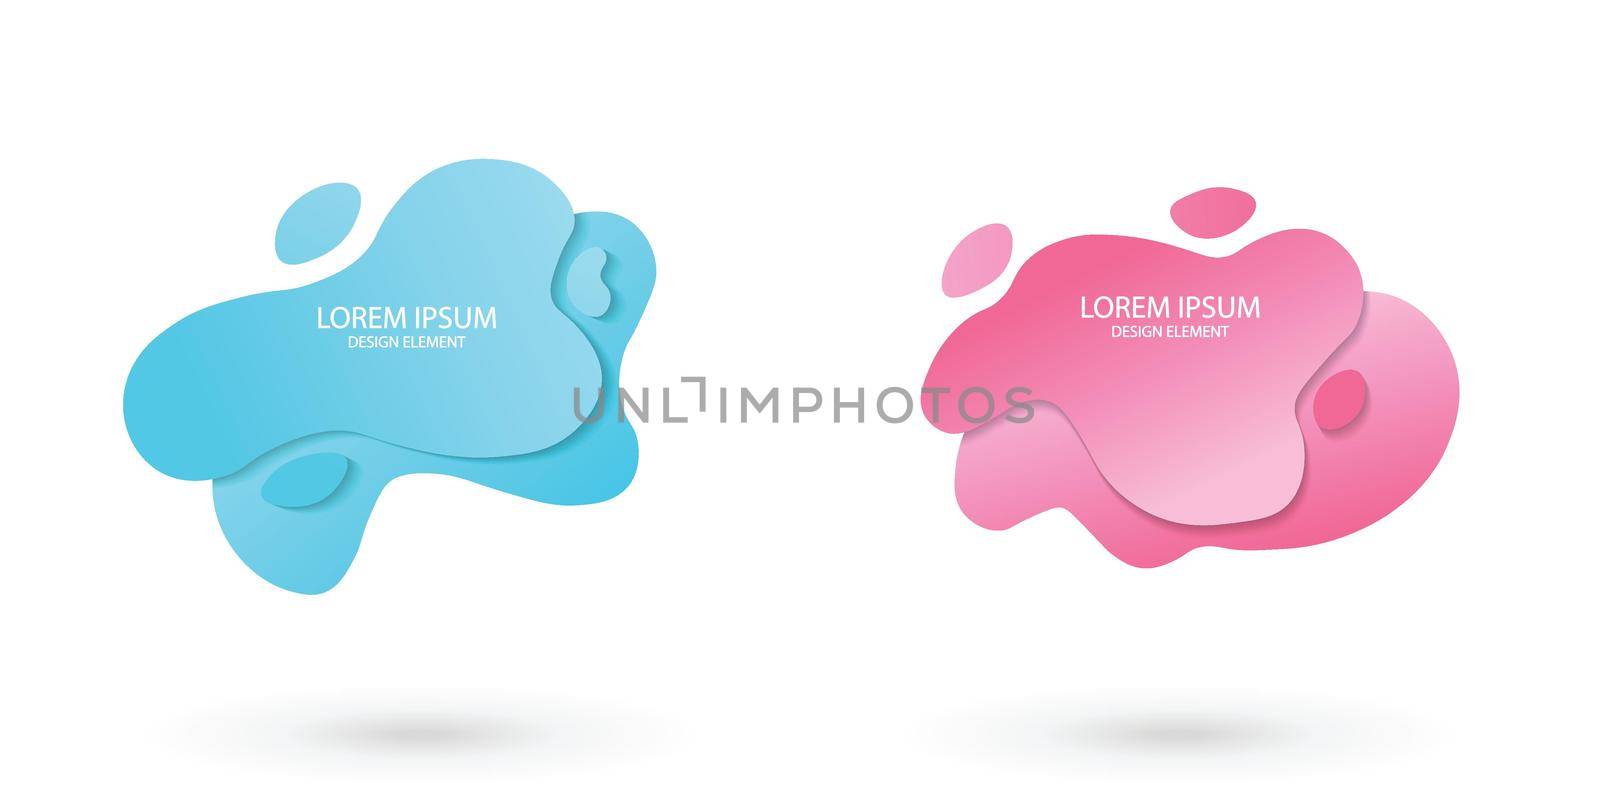 Fluid frame isolated on white background. Set of abstract liquid shapes, colorful elements, gradient waves with geometric lines, dynamical forms. Vector flat design for banner, flyer, business card.